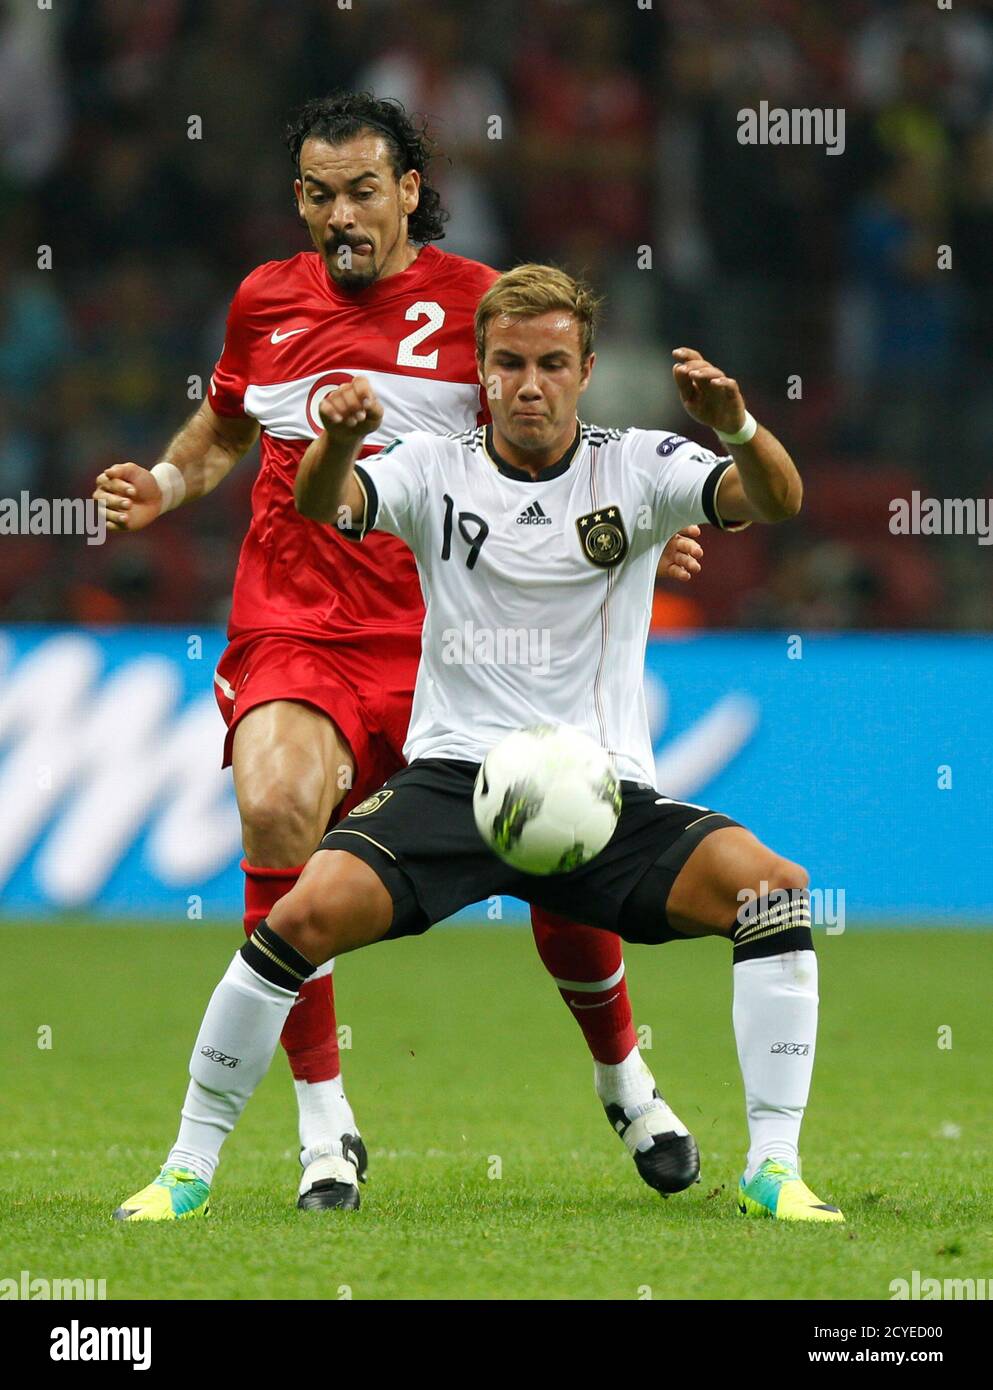 Germany's Mario Gotze (R) challenges Turkey's Servet Cetin during their Euro 2012 qualifying Group A soccer match at Turk Telekom Arena in Istanbul October 7, 2011. REUTERS/Murad Sezer (TURKEY  - Tags: SPORT SOCCER) Stock Photo